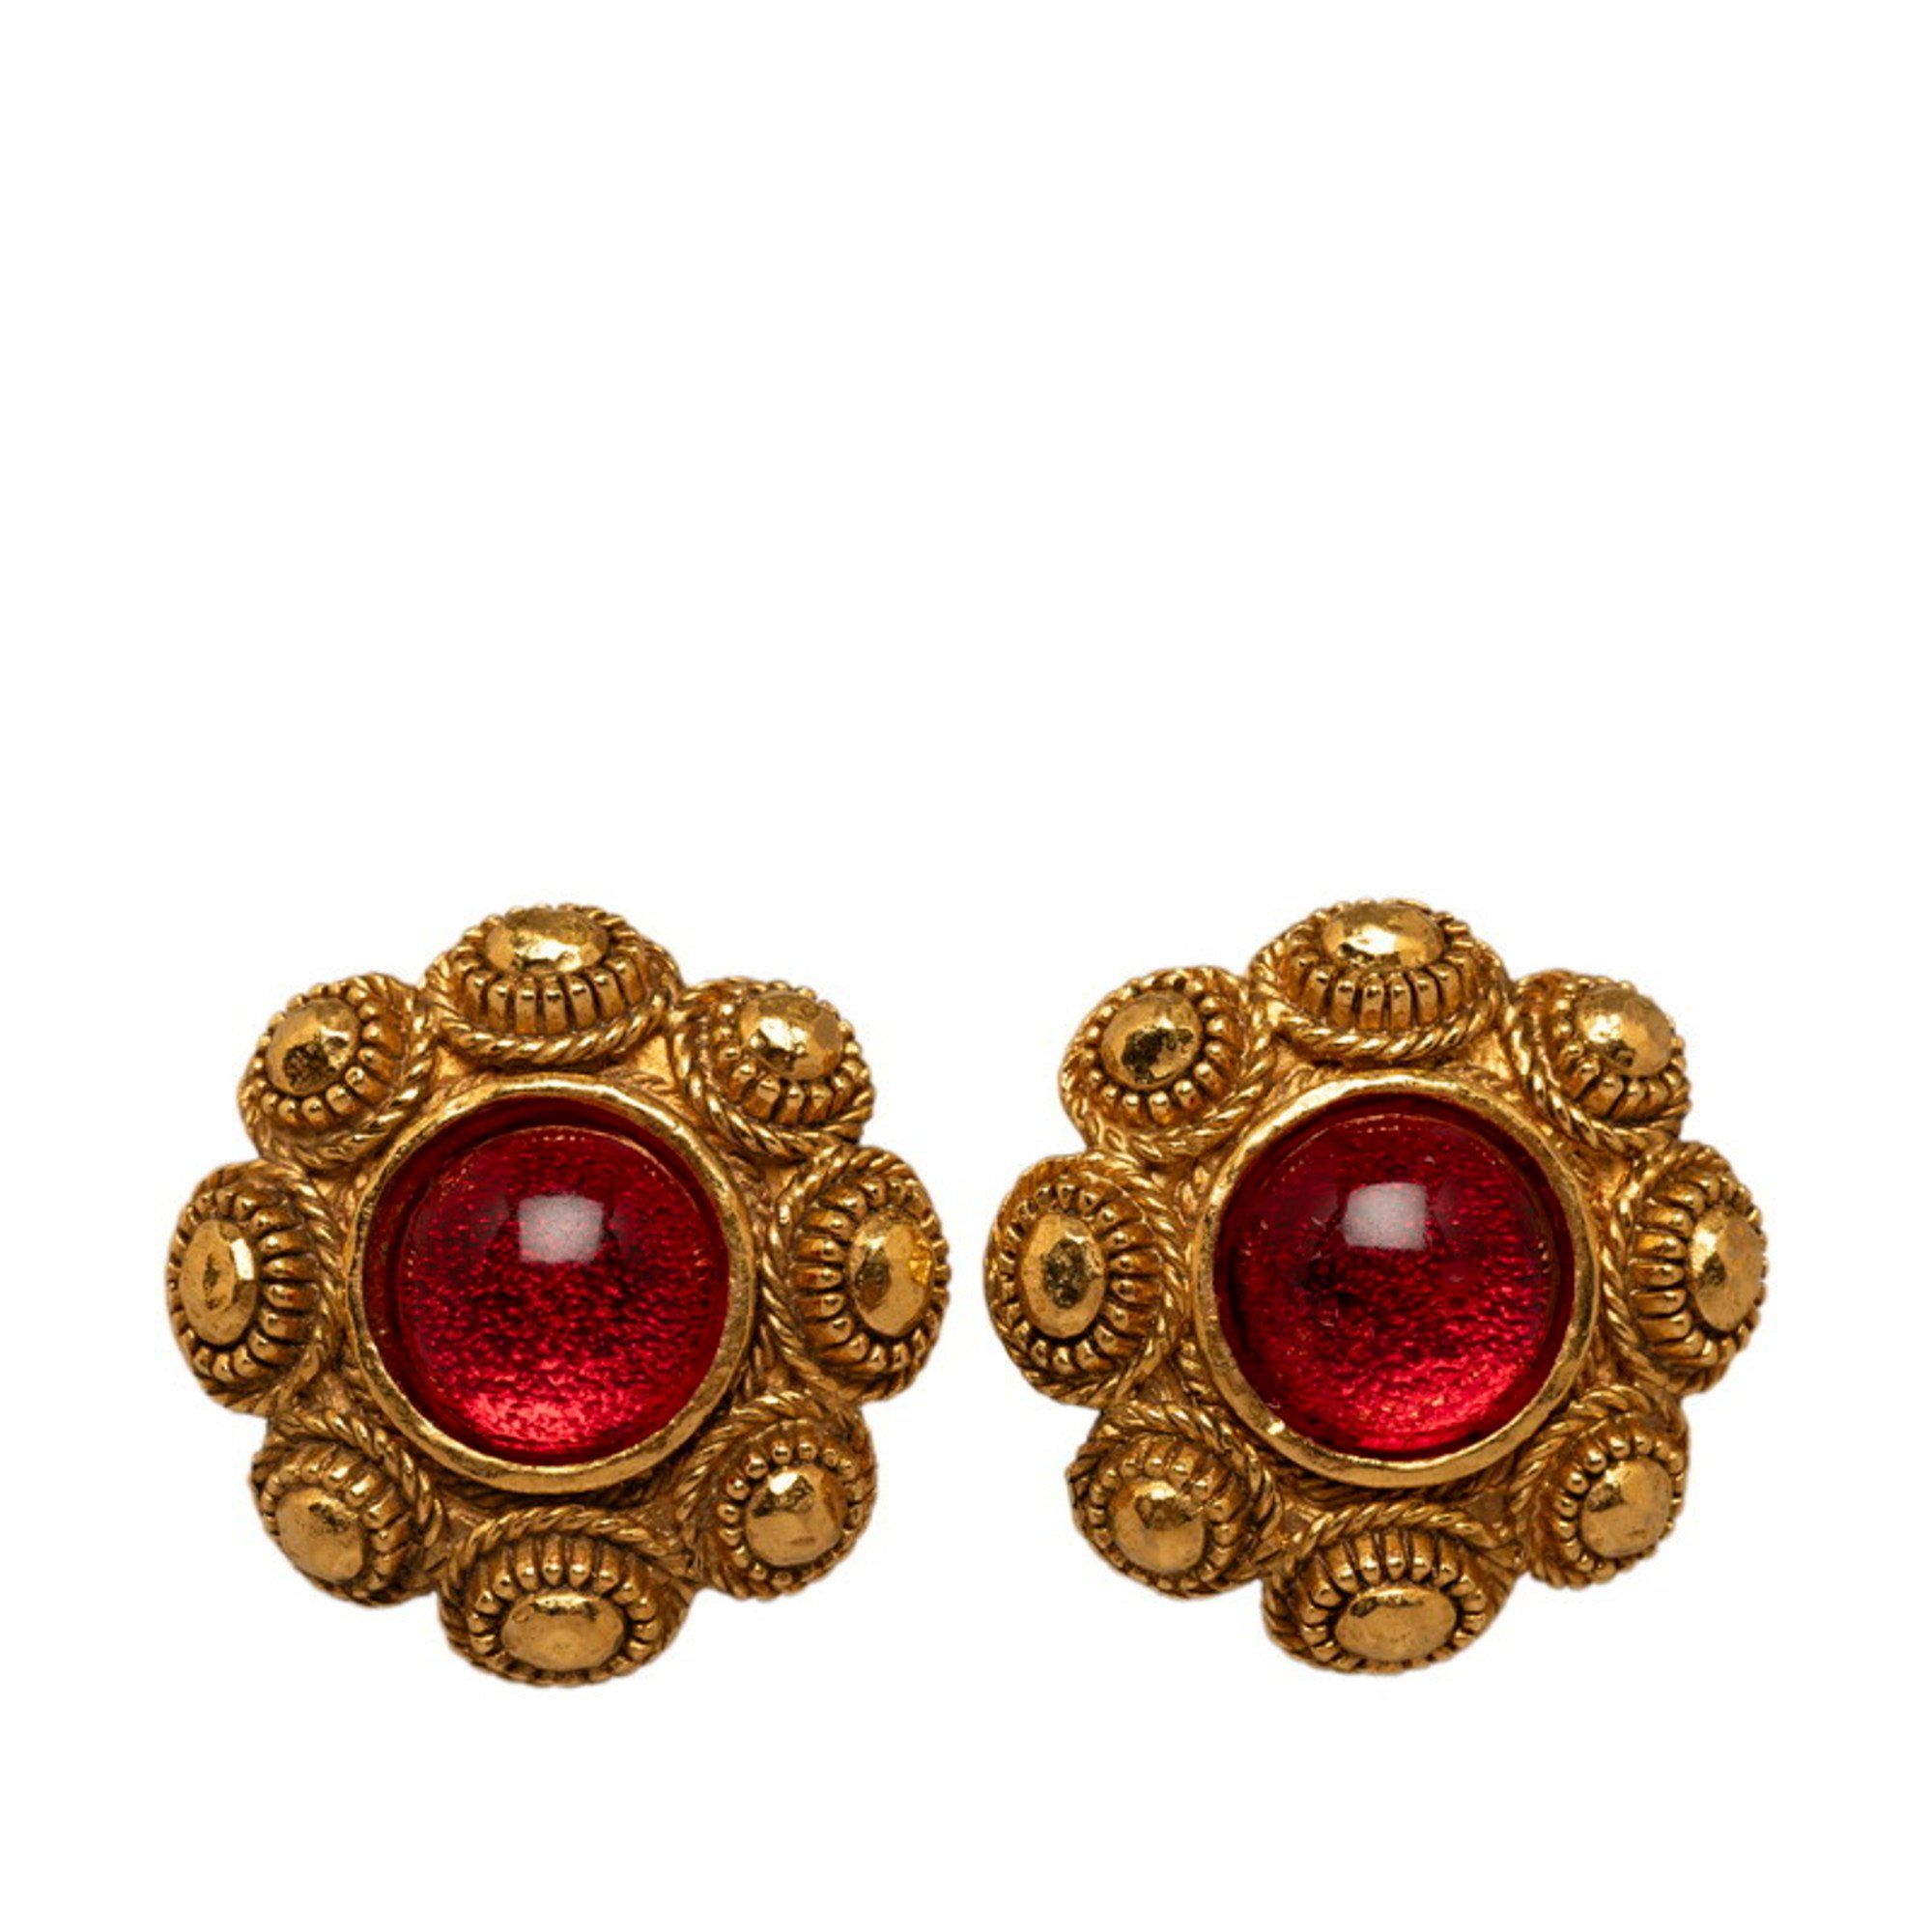 CHANEL Colored Stone Flower Motif Earrings Gold Red Plated Resin Women's